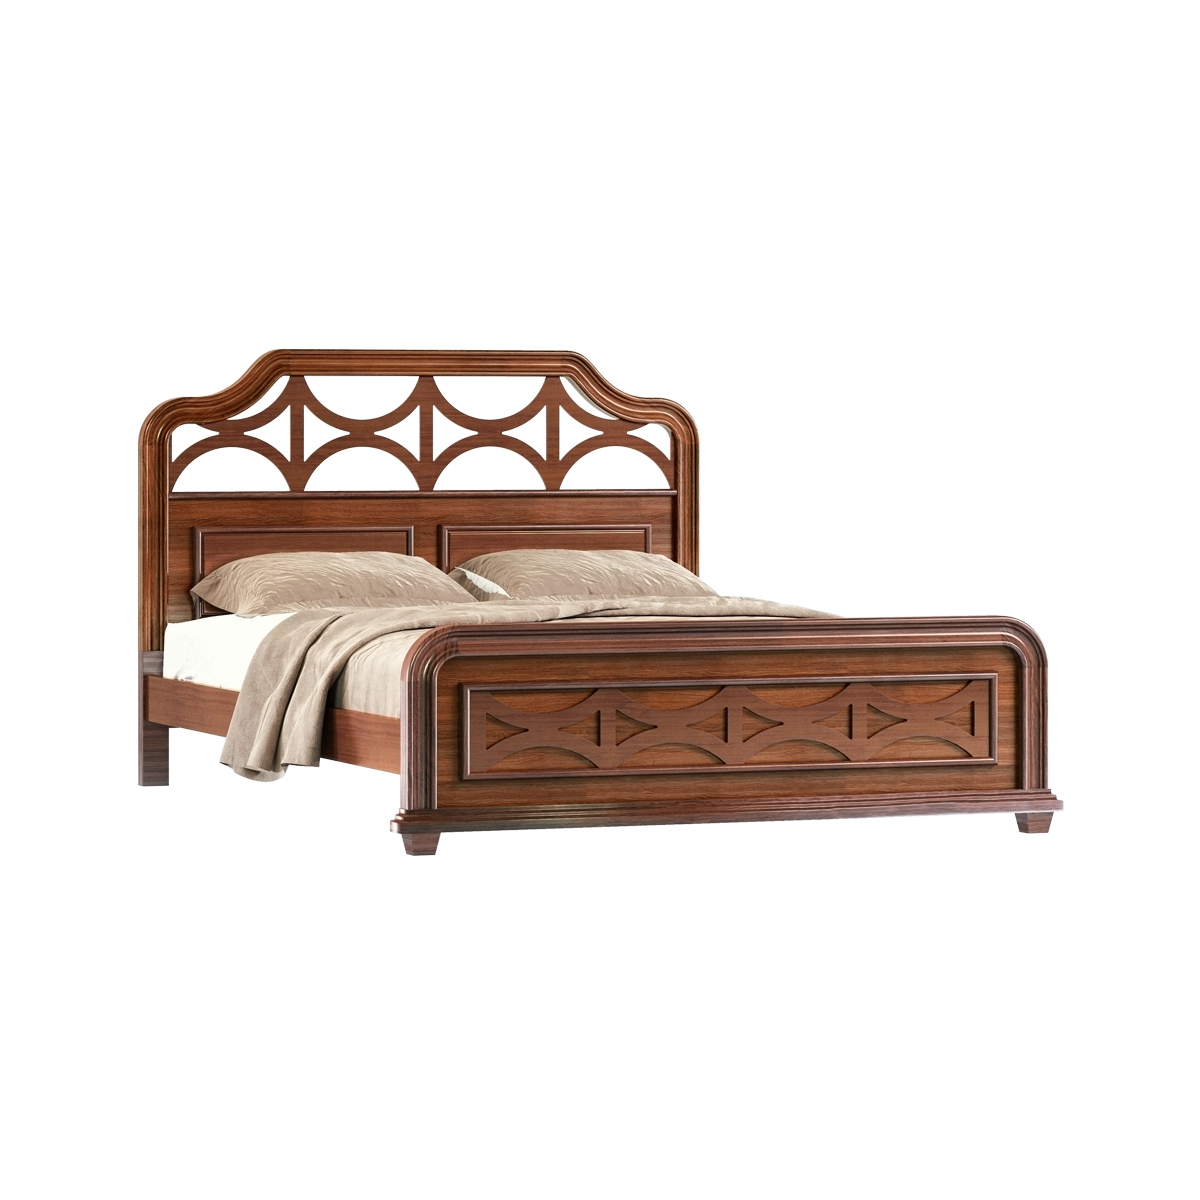 Panam Wooden Double bed I BDH-364-3-1-20